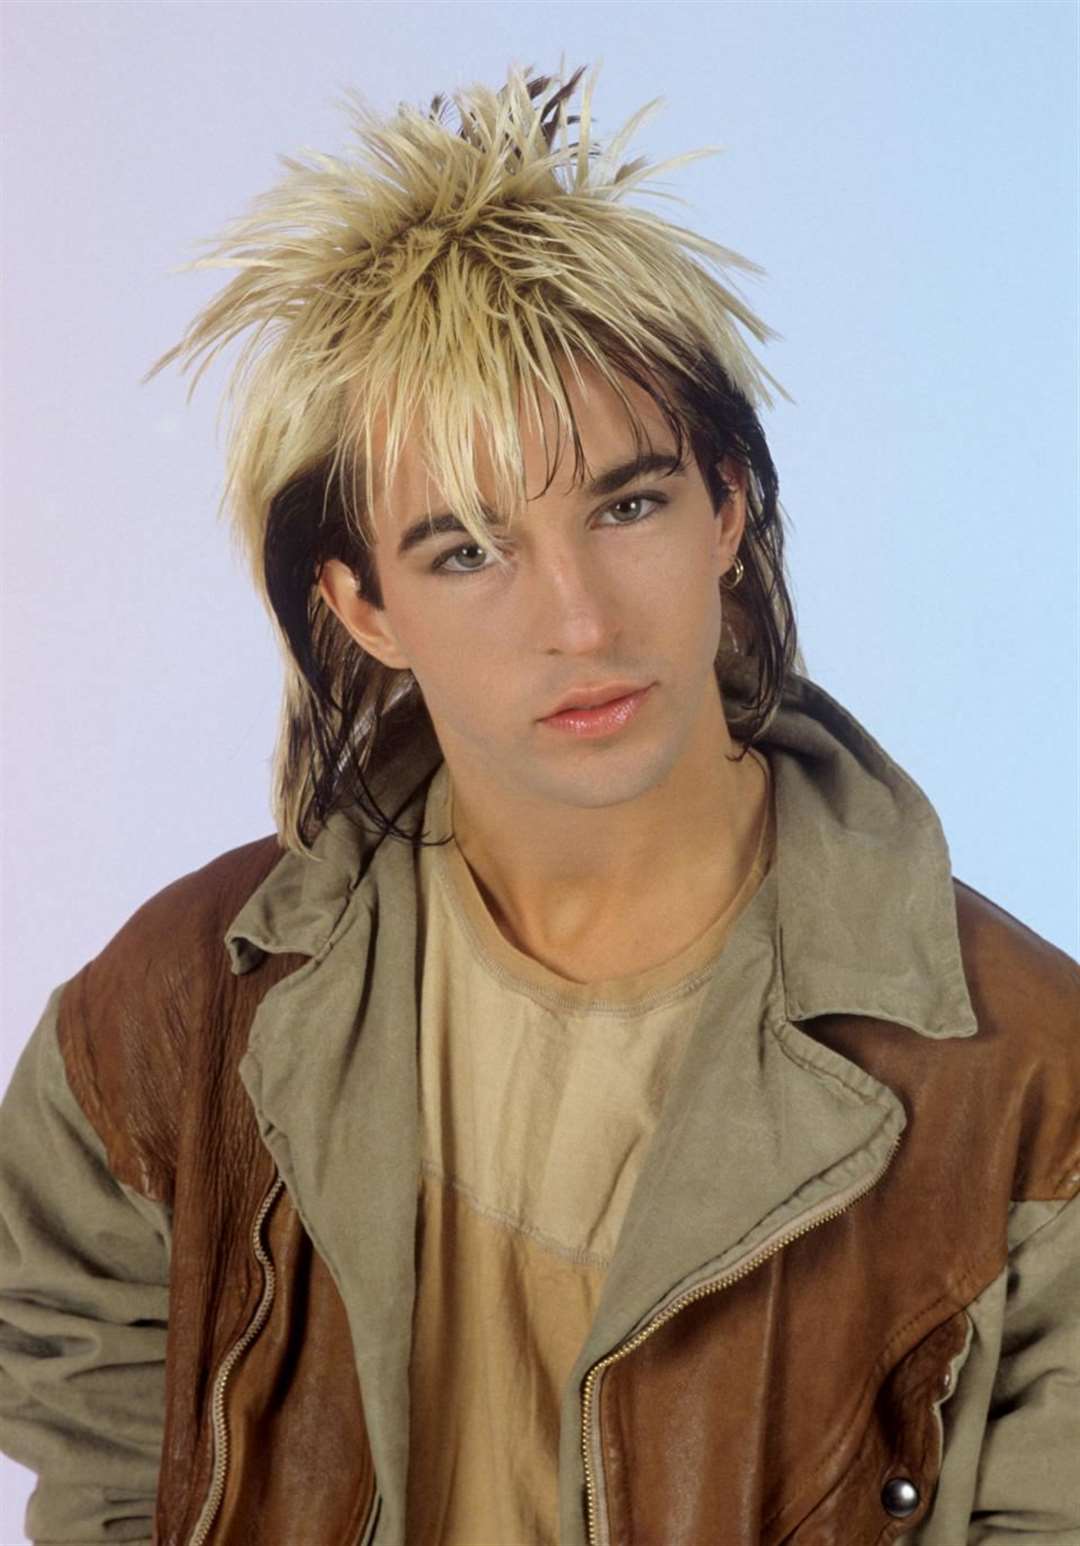 The front man of Kajagoogoo or was he the left wing back of North Macedonia?